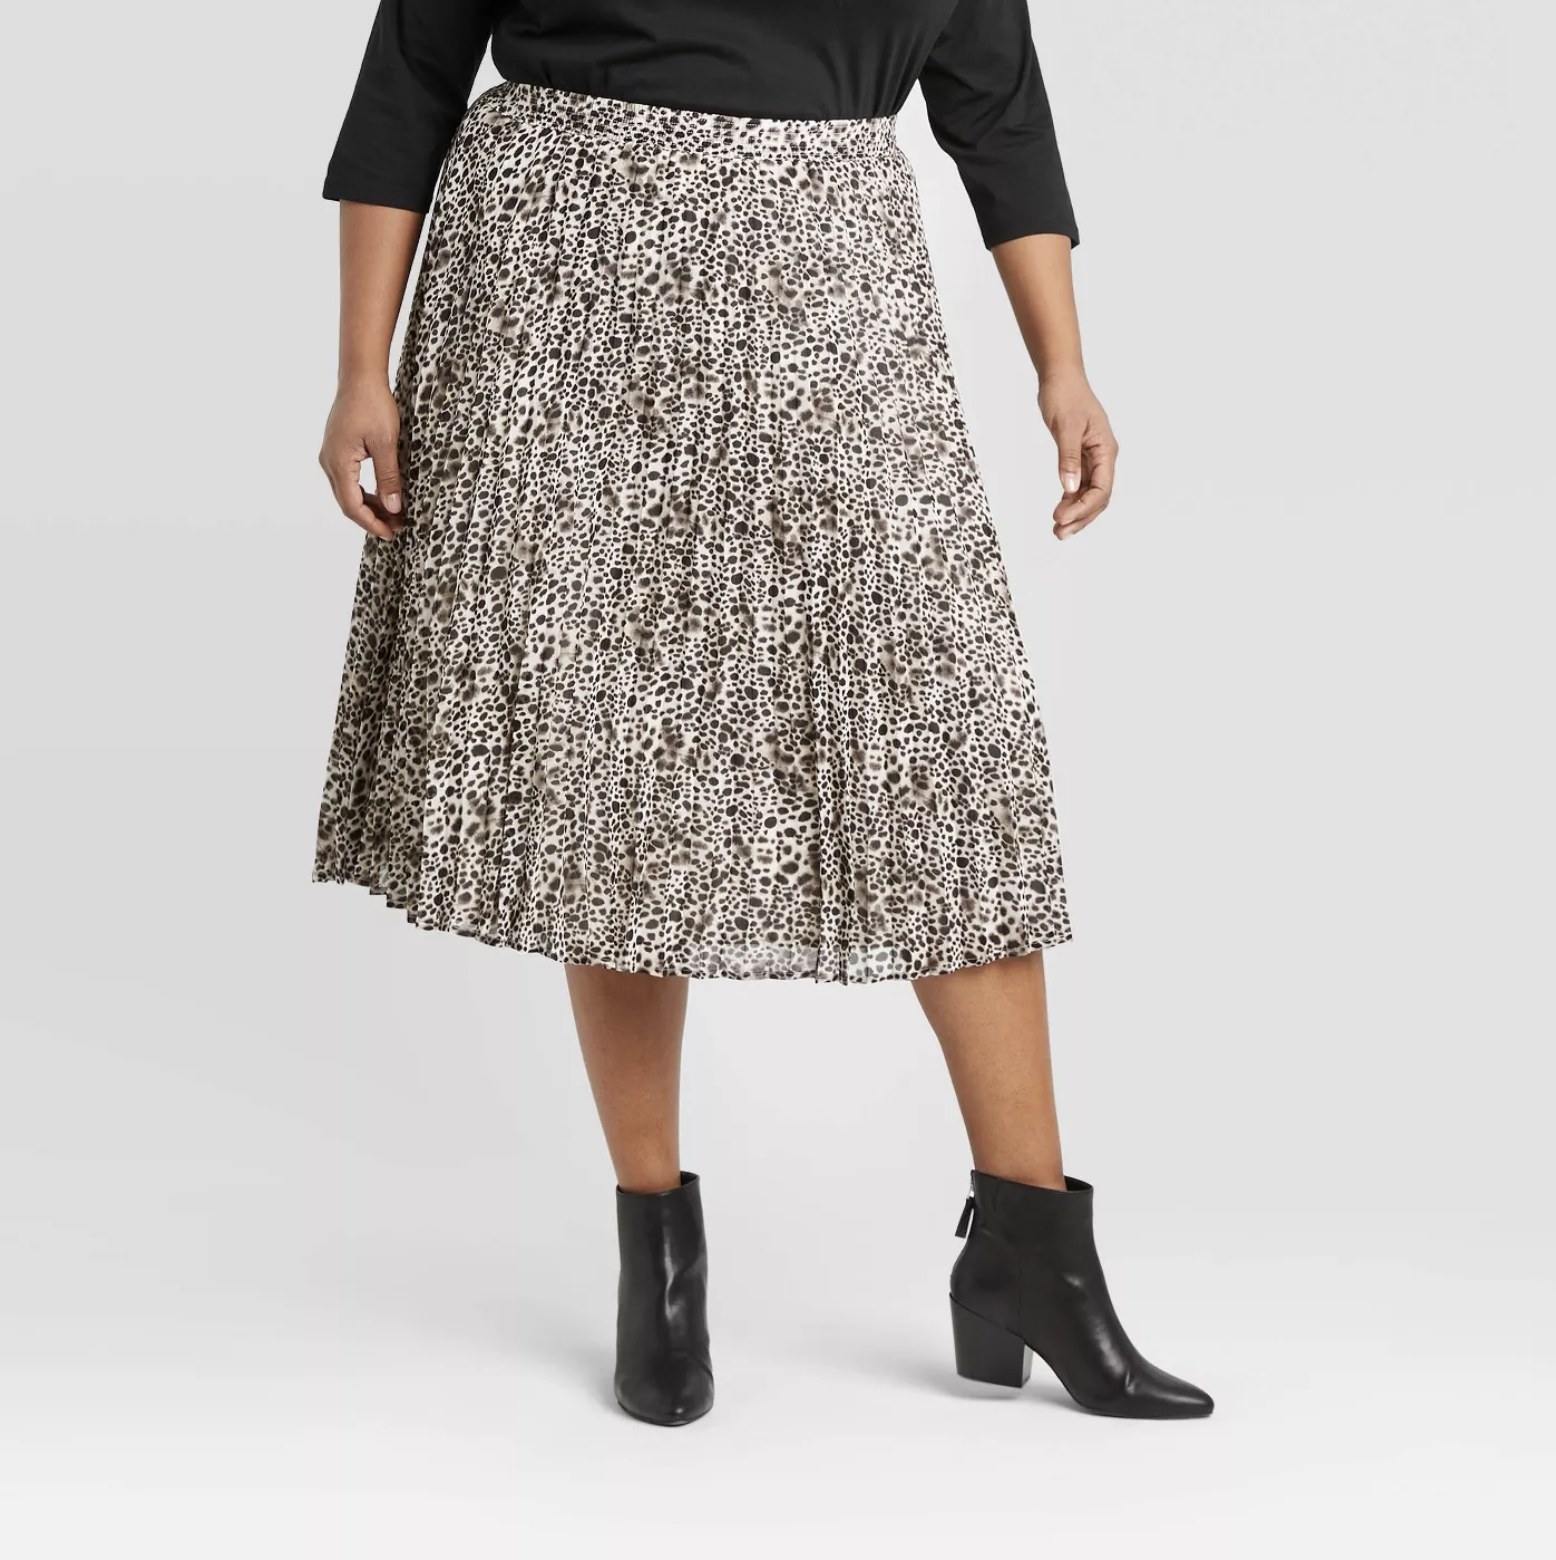 31 Light And Breathable Pieces From Target For Anyone Who's Just Too ...